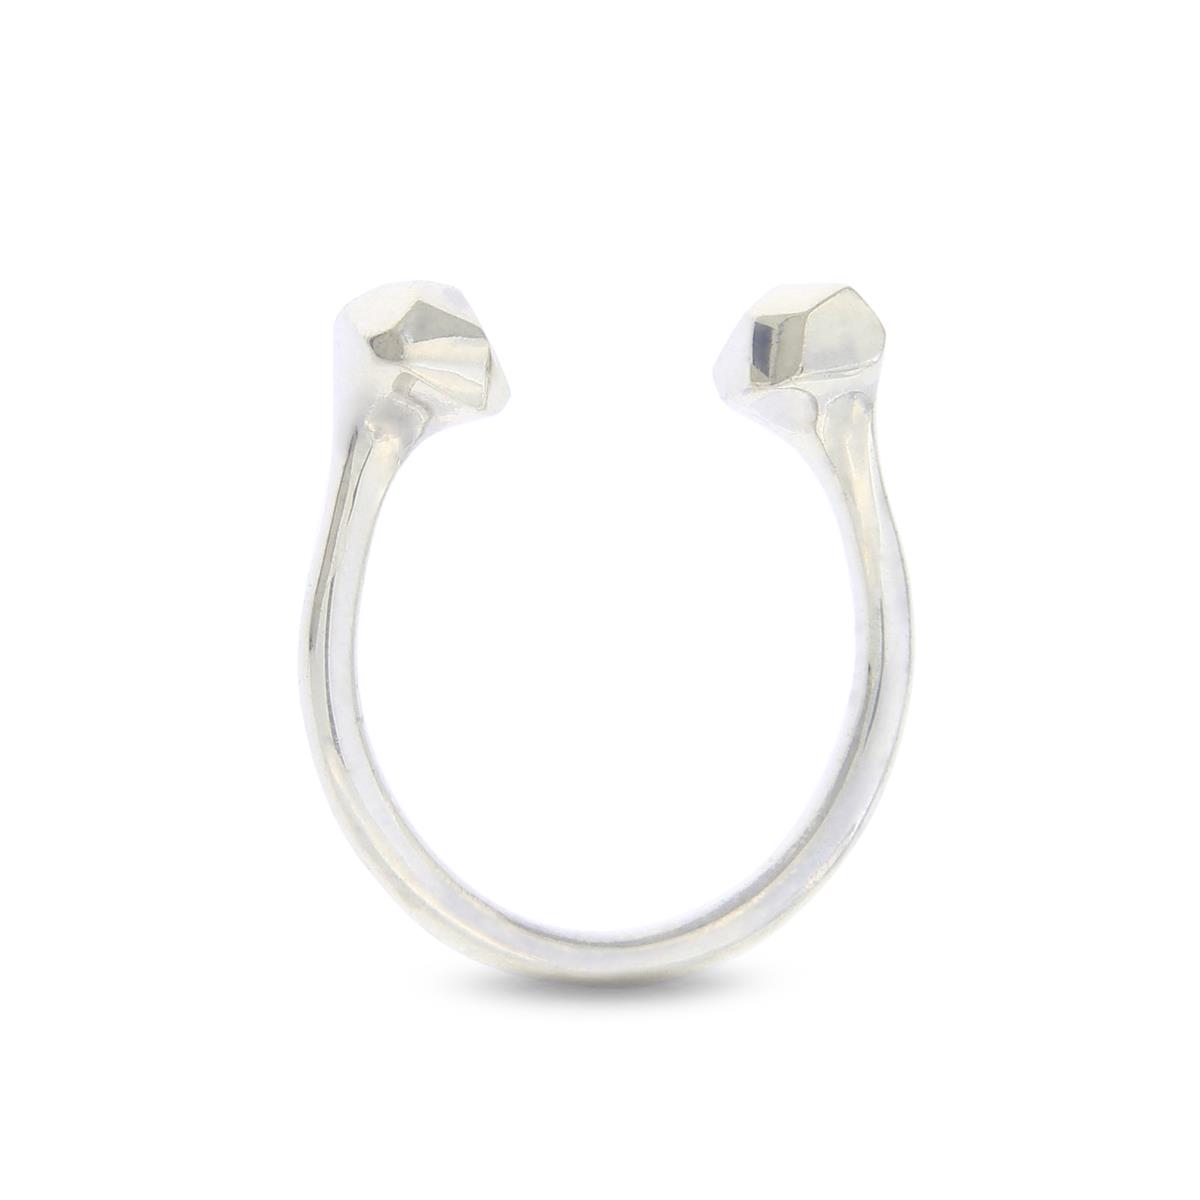 Katie g. Jewellery - Cutting Edge Nugget Ring - Small - poliertes sterling silber - 130€